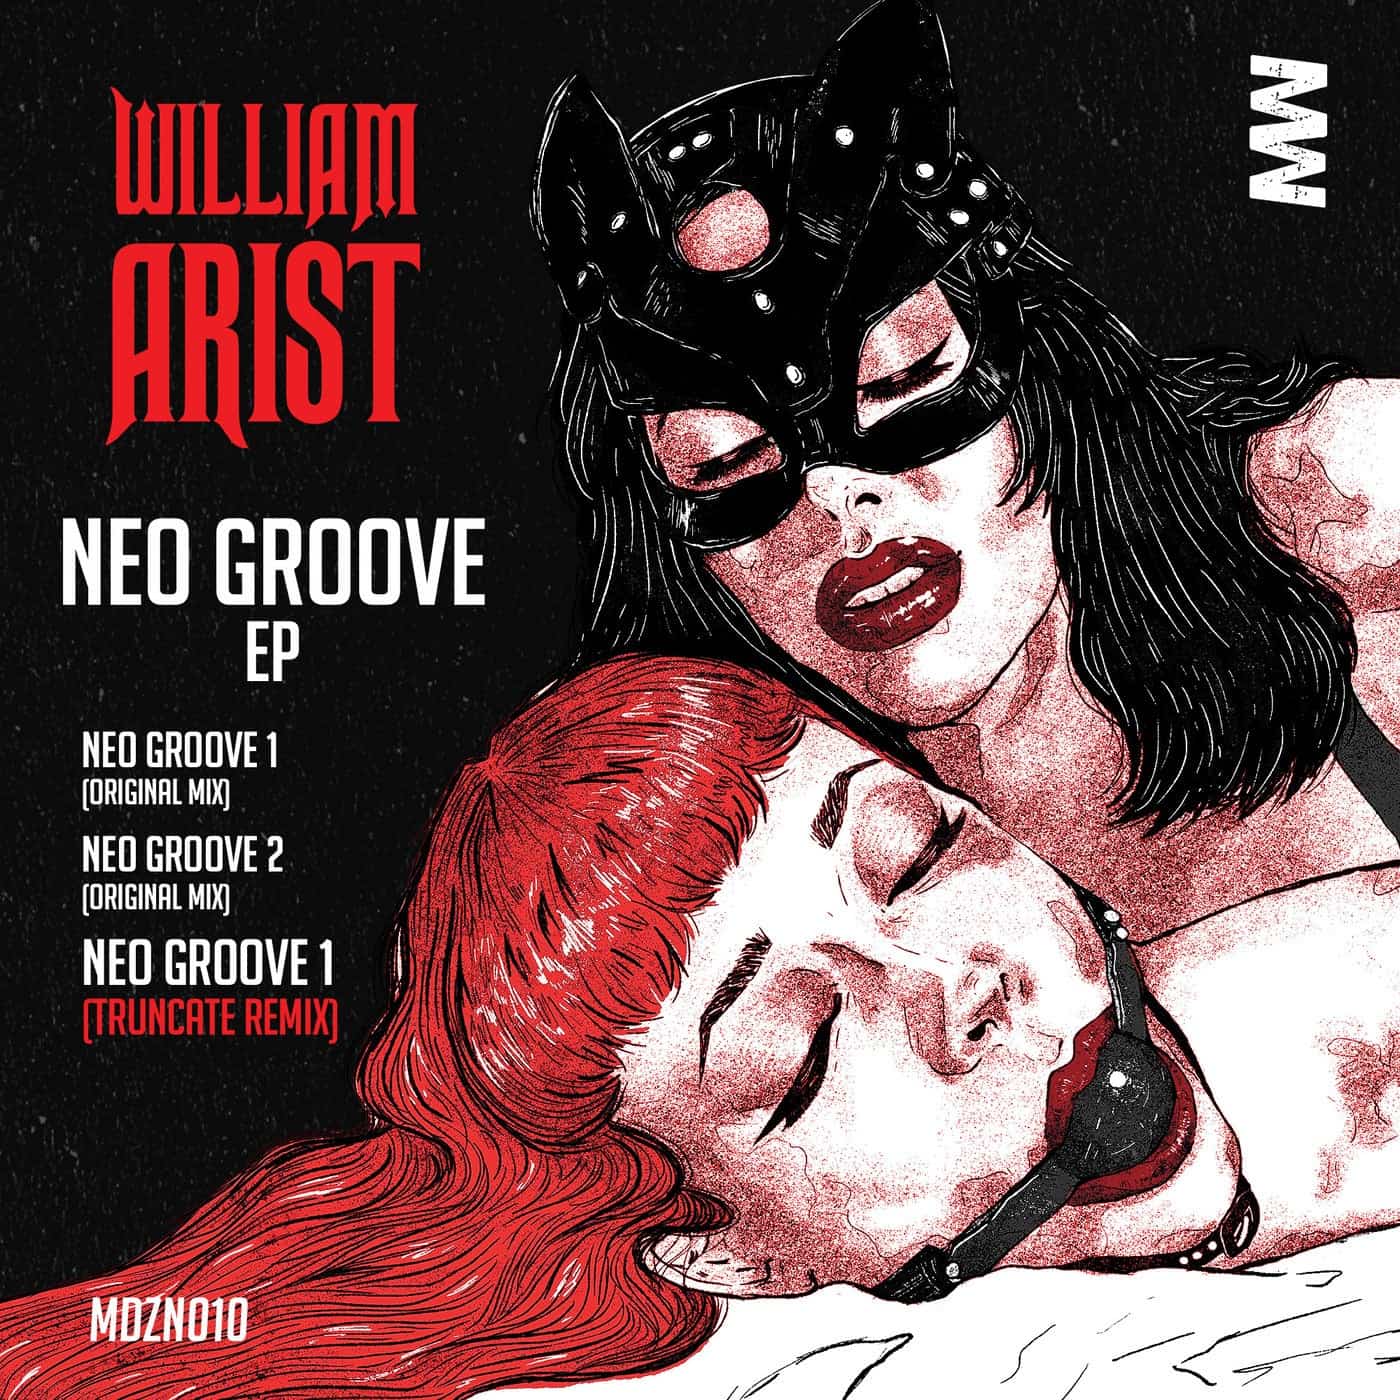 Download William Arist - Neo Groove EP on Electrobuzz